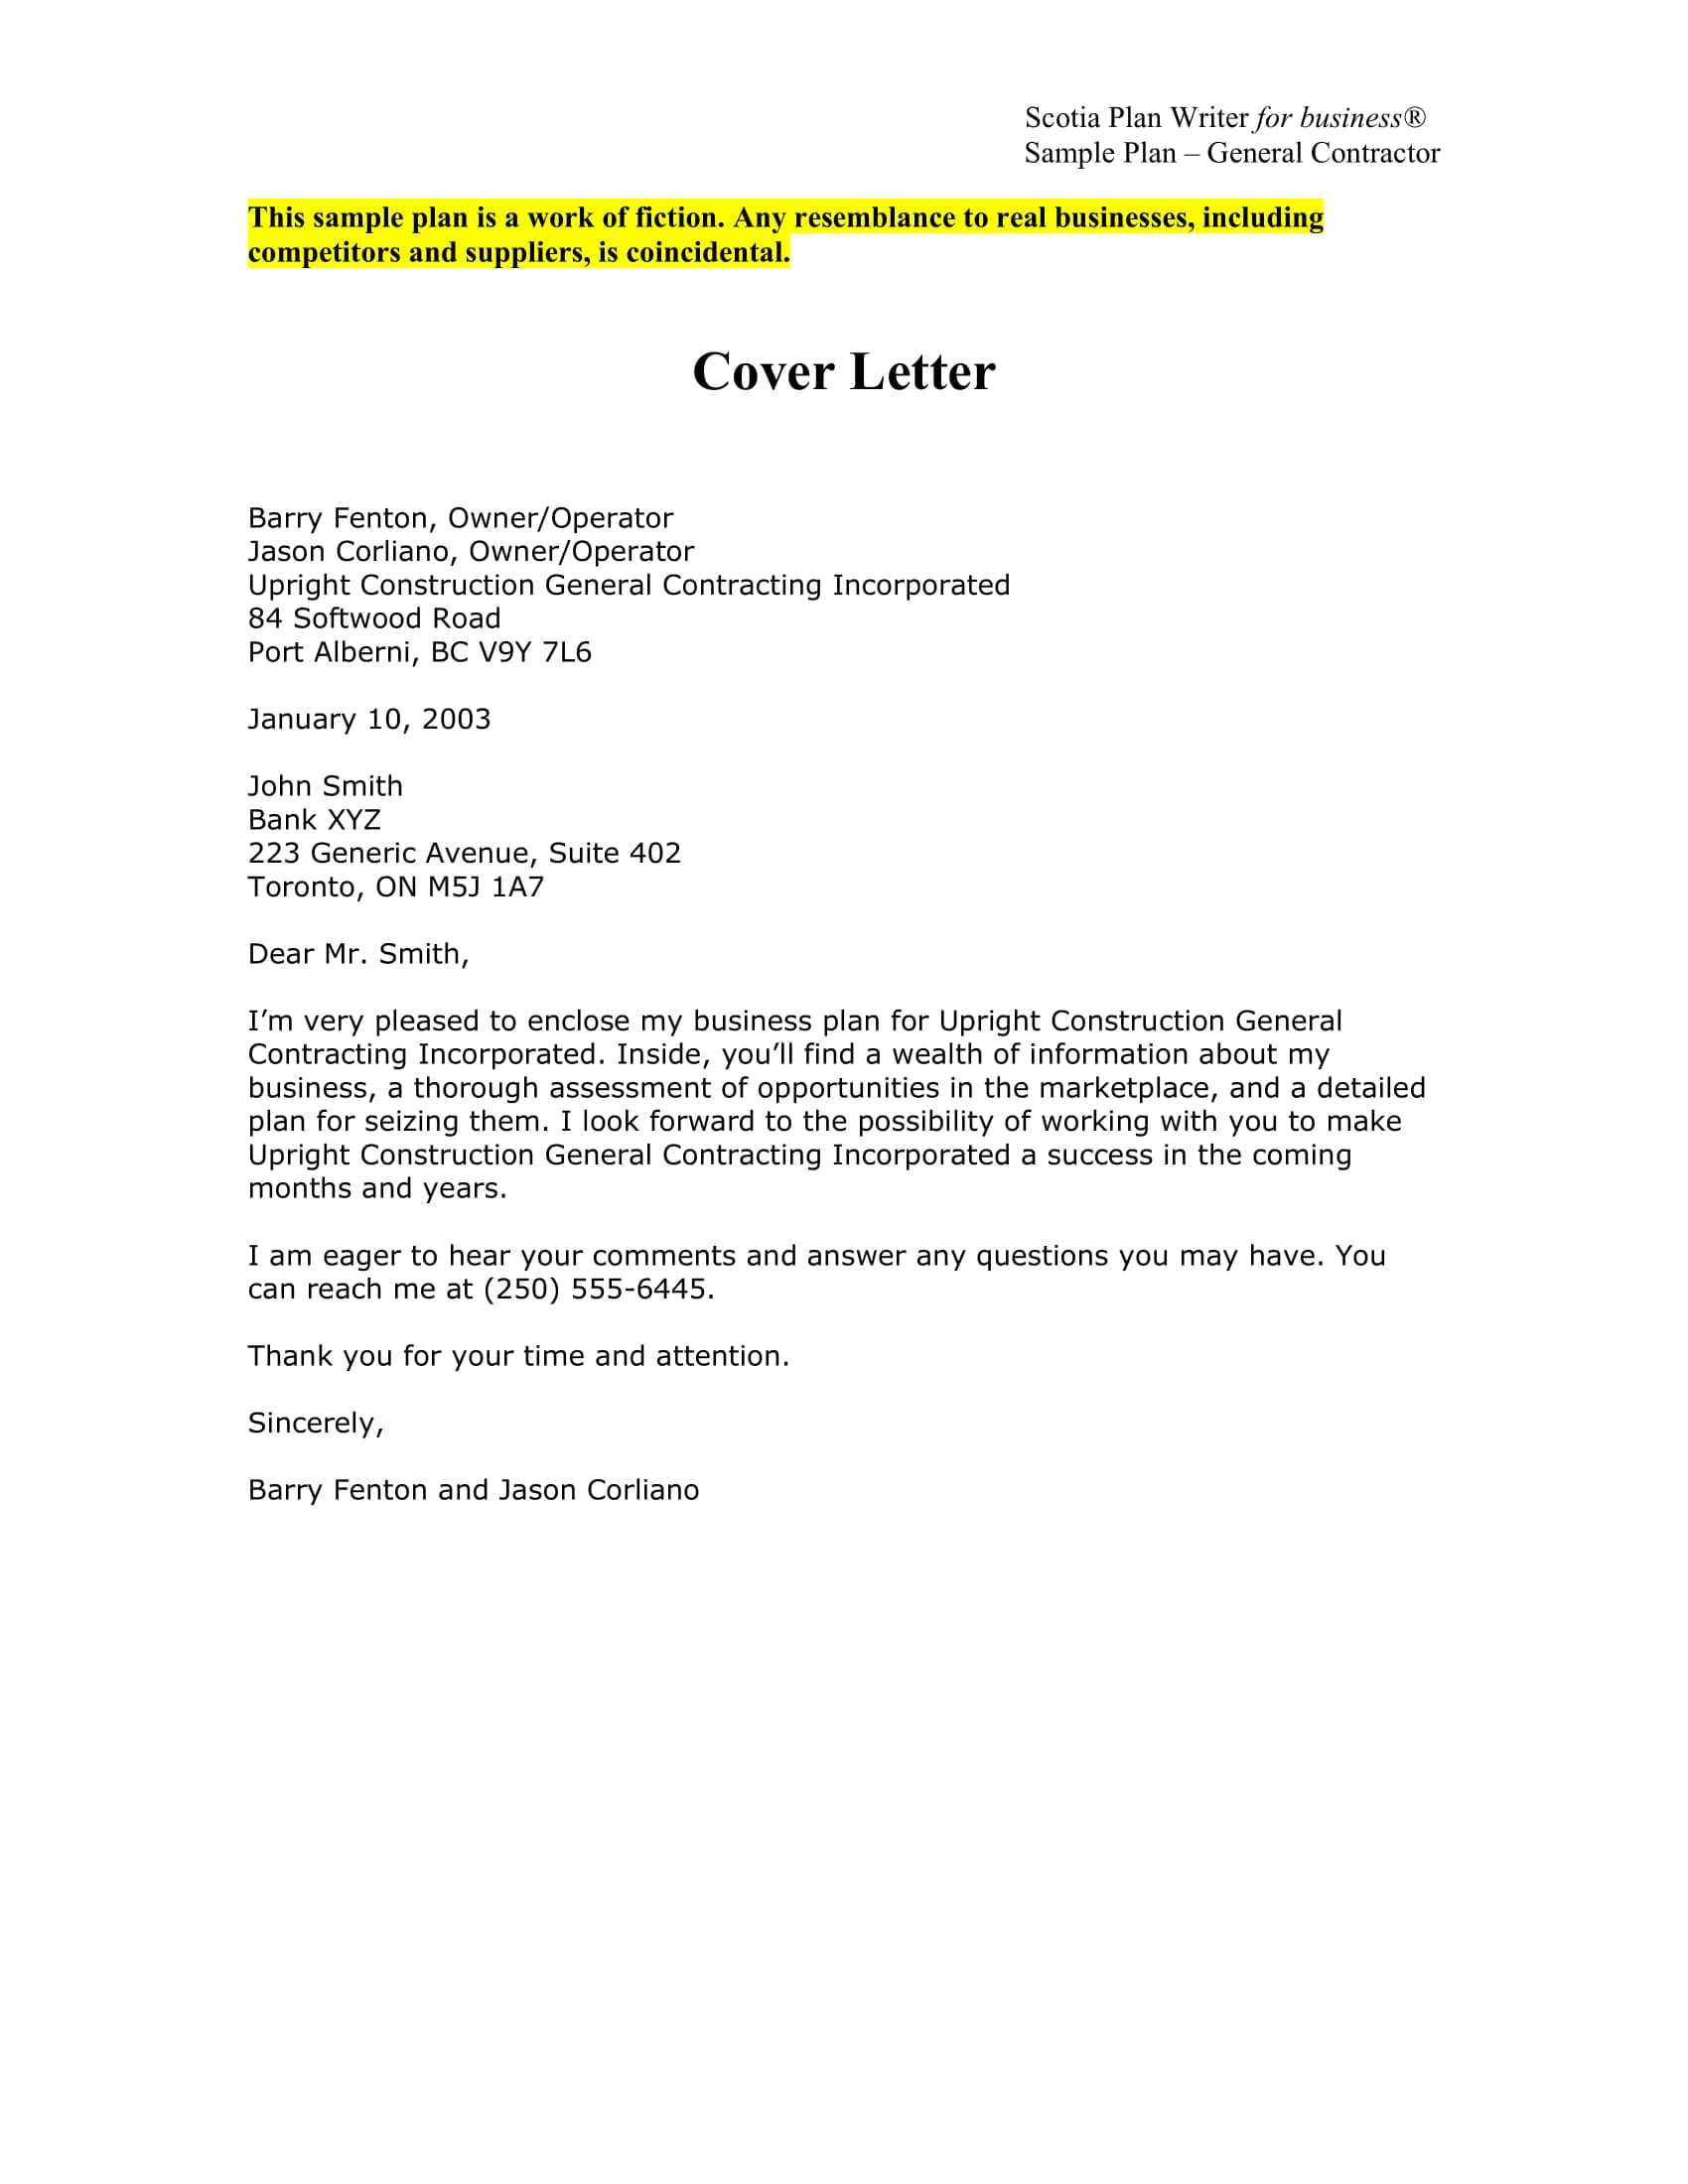 Business Proposal Cover Letter Examples – Pdf | Examples With Regard To Email Template For Business Proposal